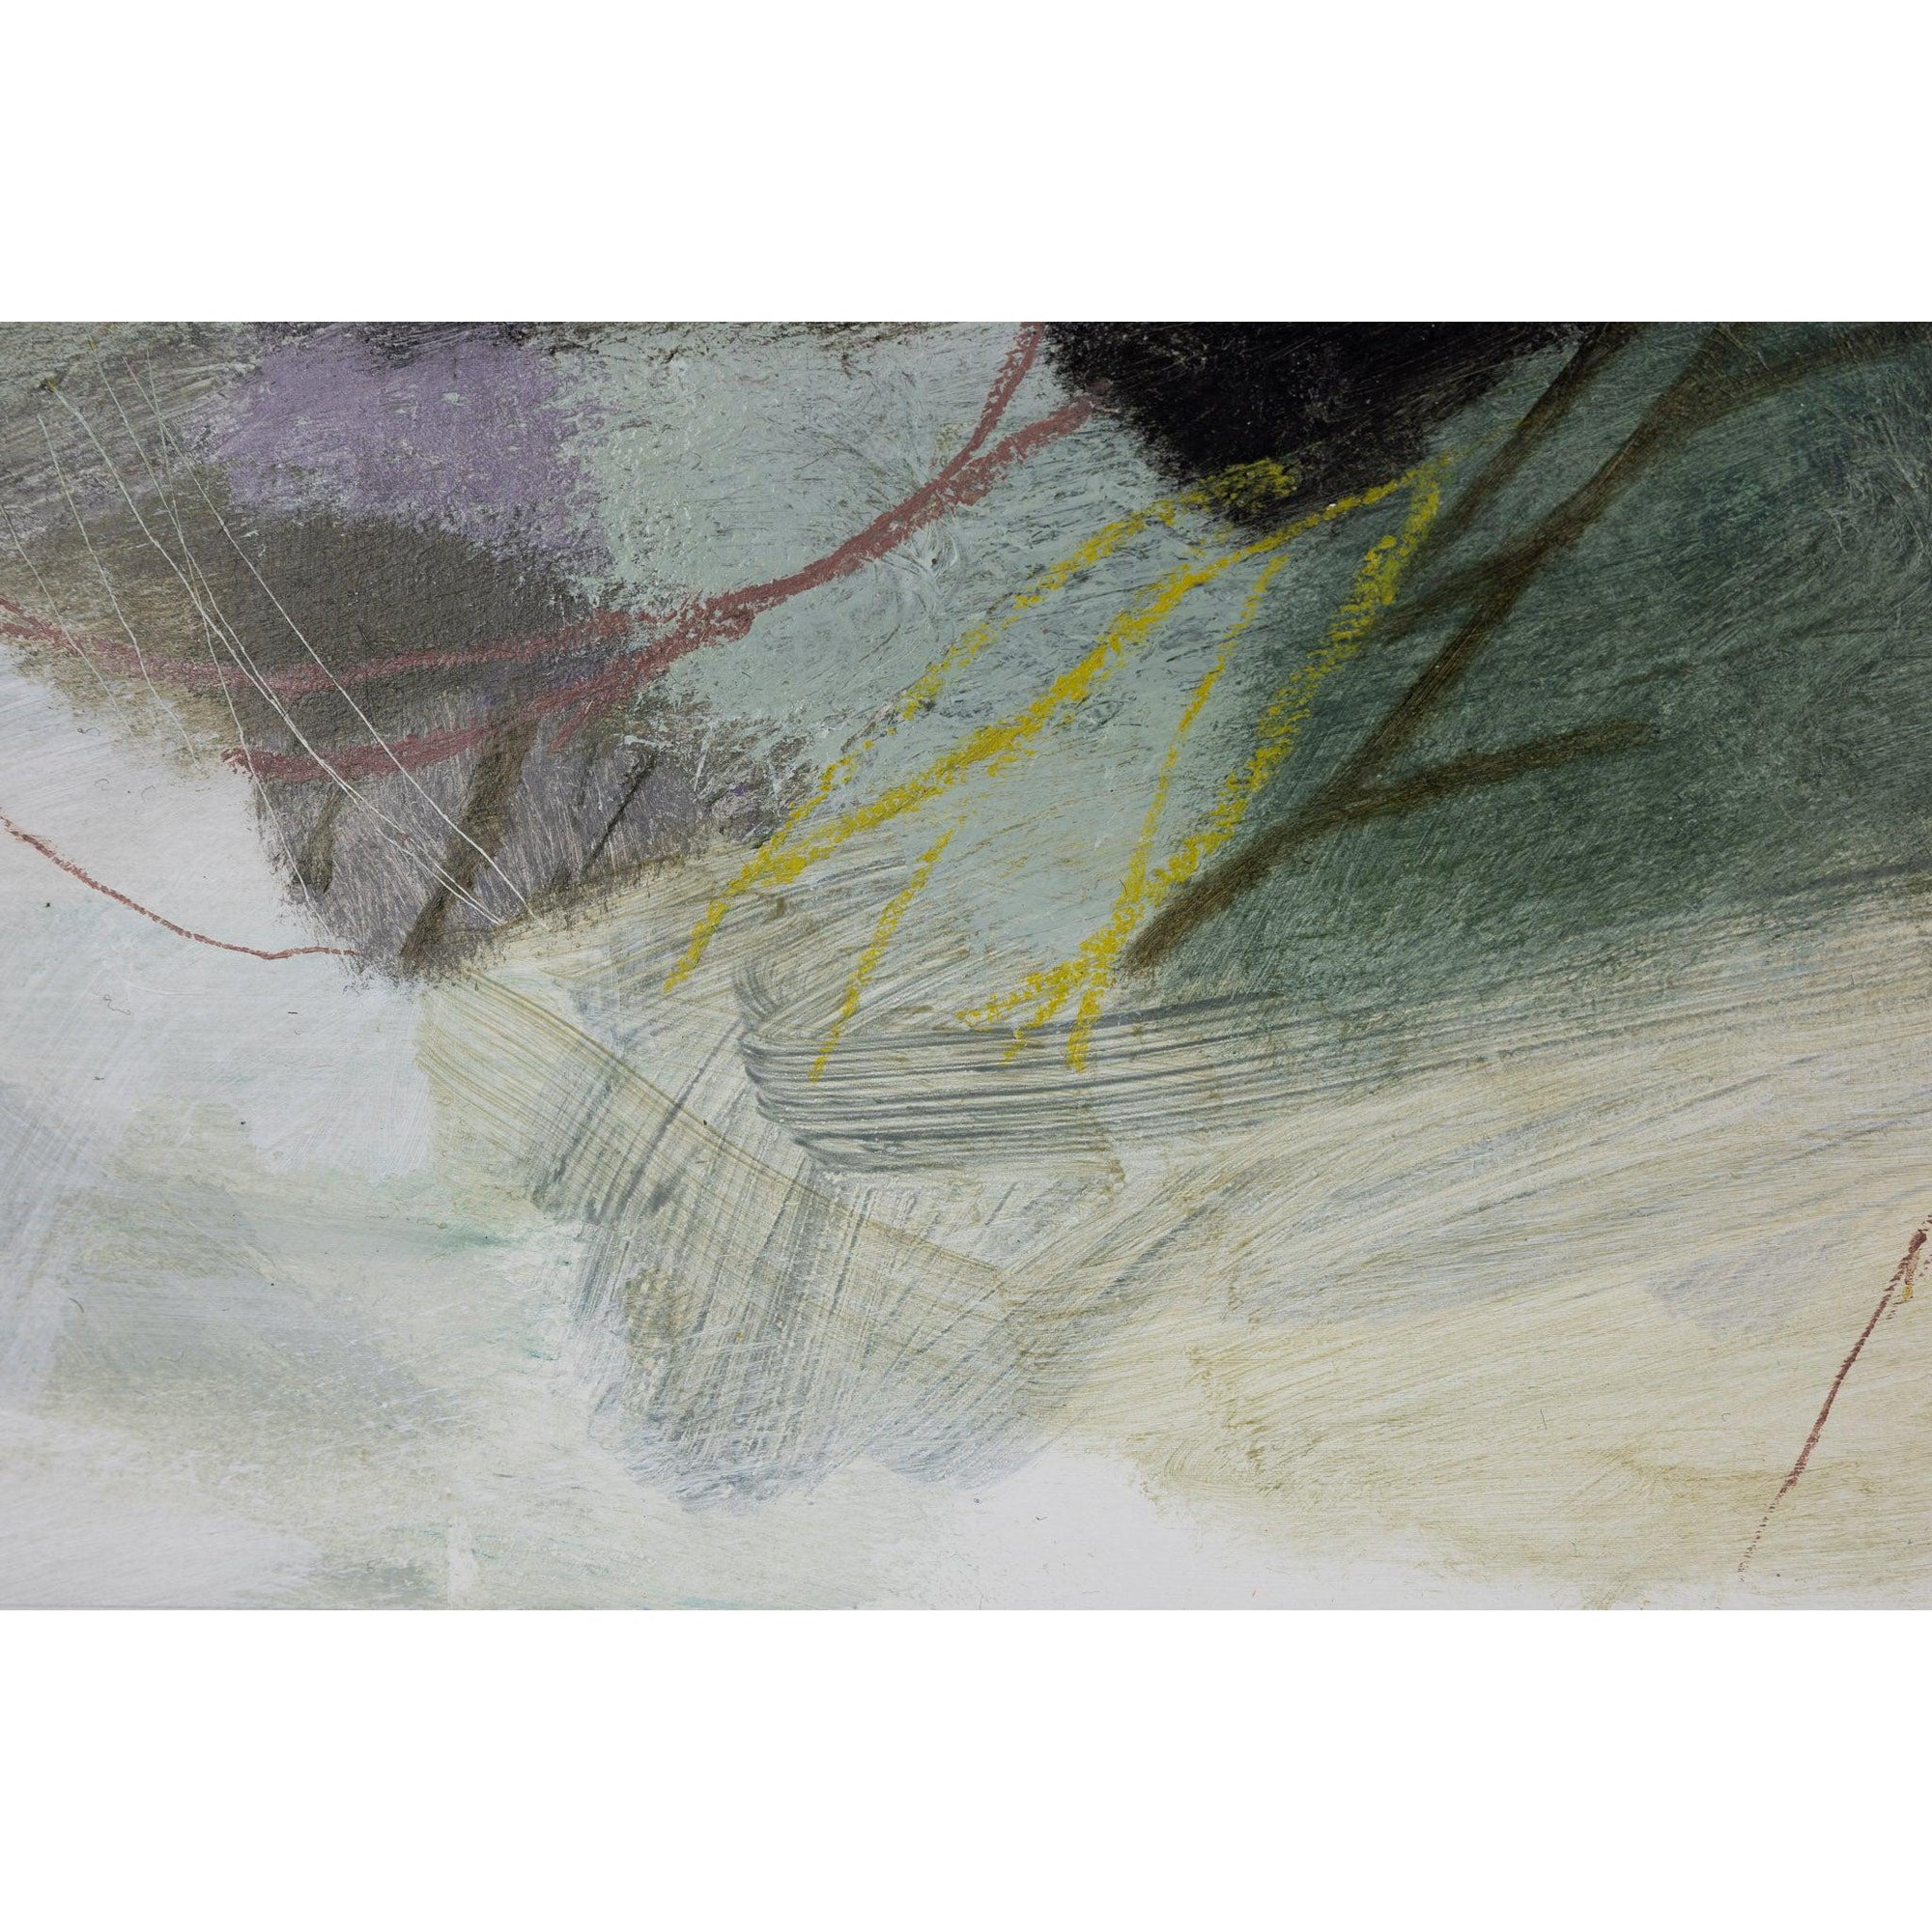 Shifting Colours 2, mixed media by Karen Birchwood, available from Padstow Gallery, Cornwall